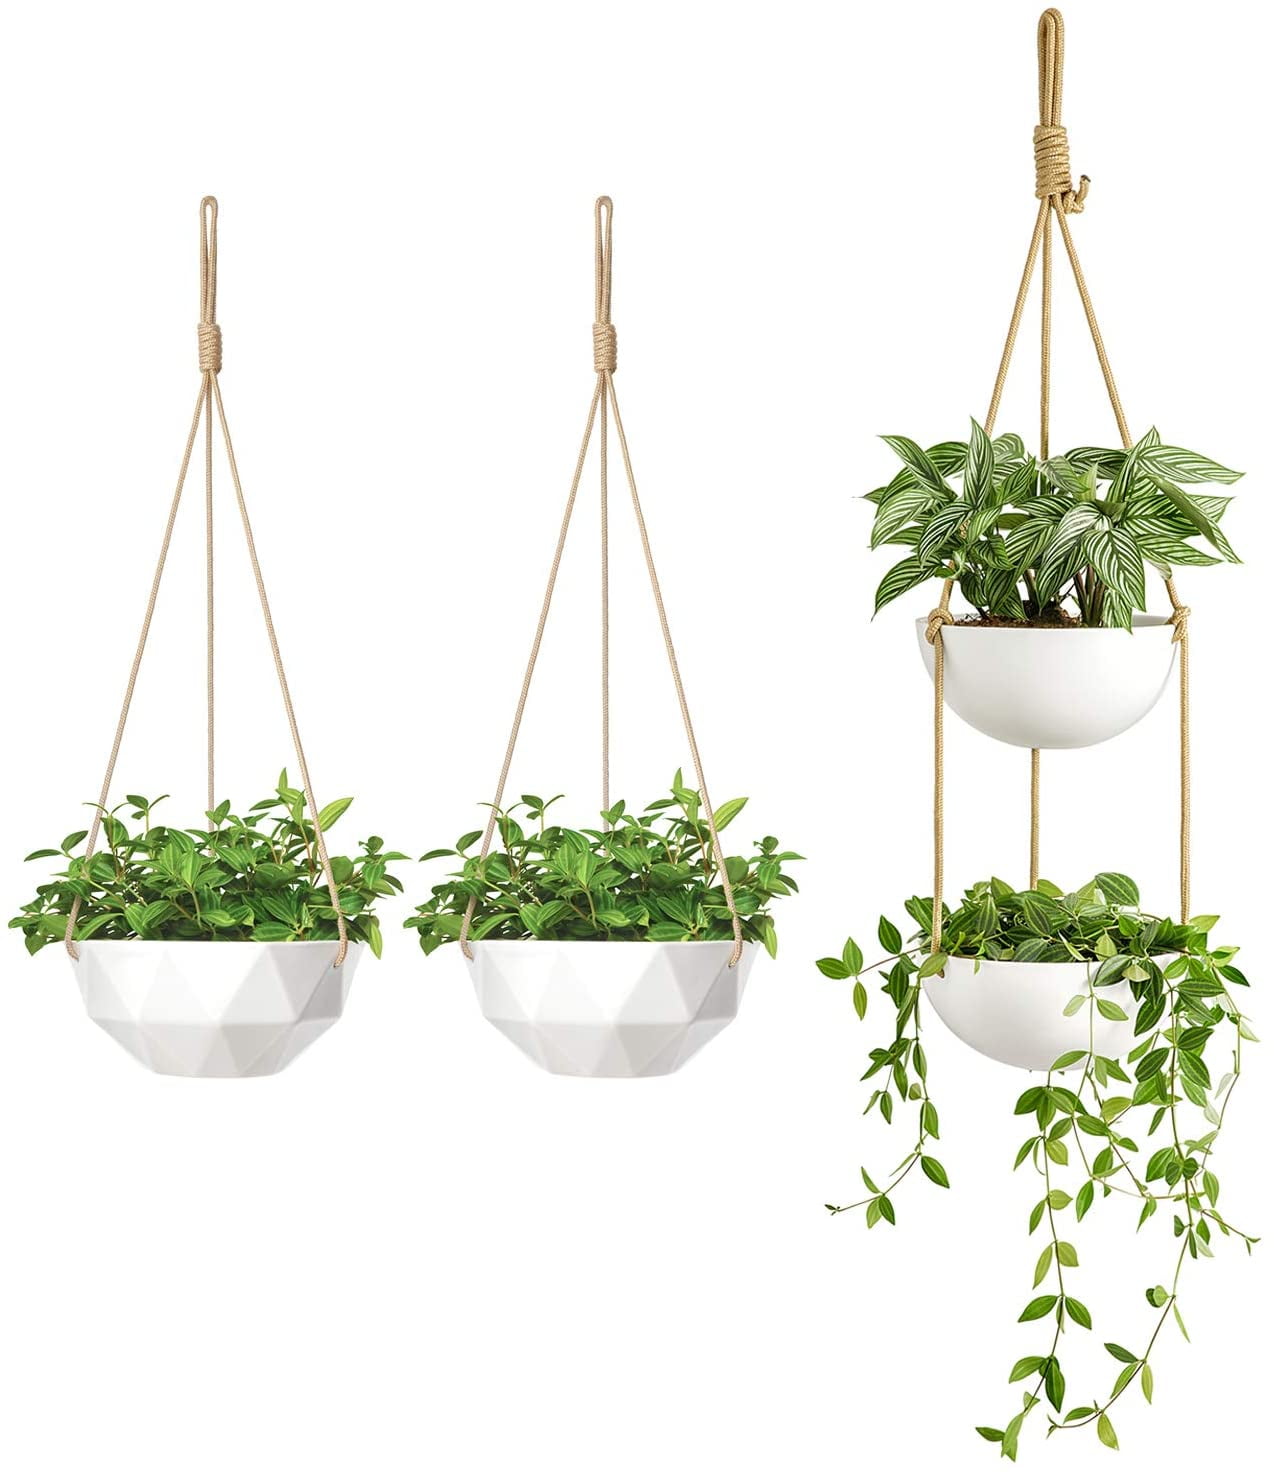 6.5"x 5.75" Kenzie Hanging Pots for Plant 91780 